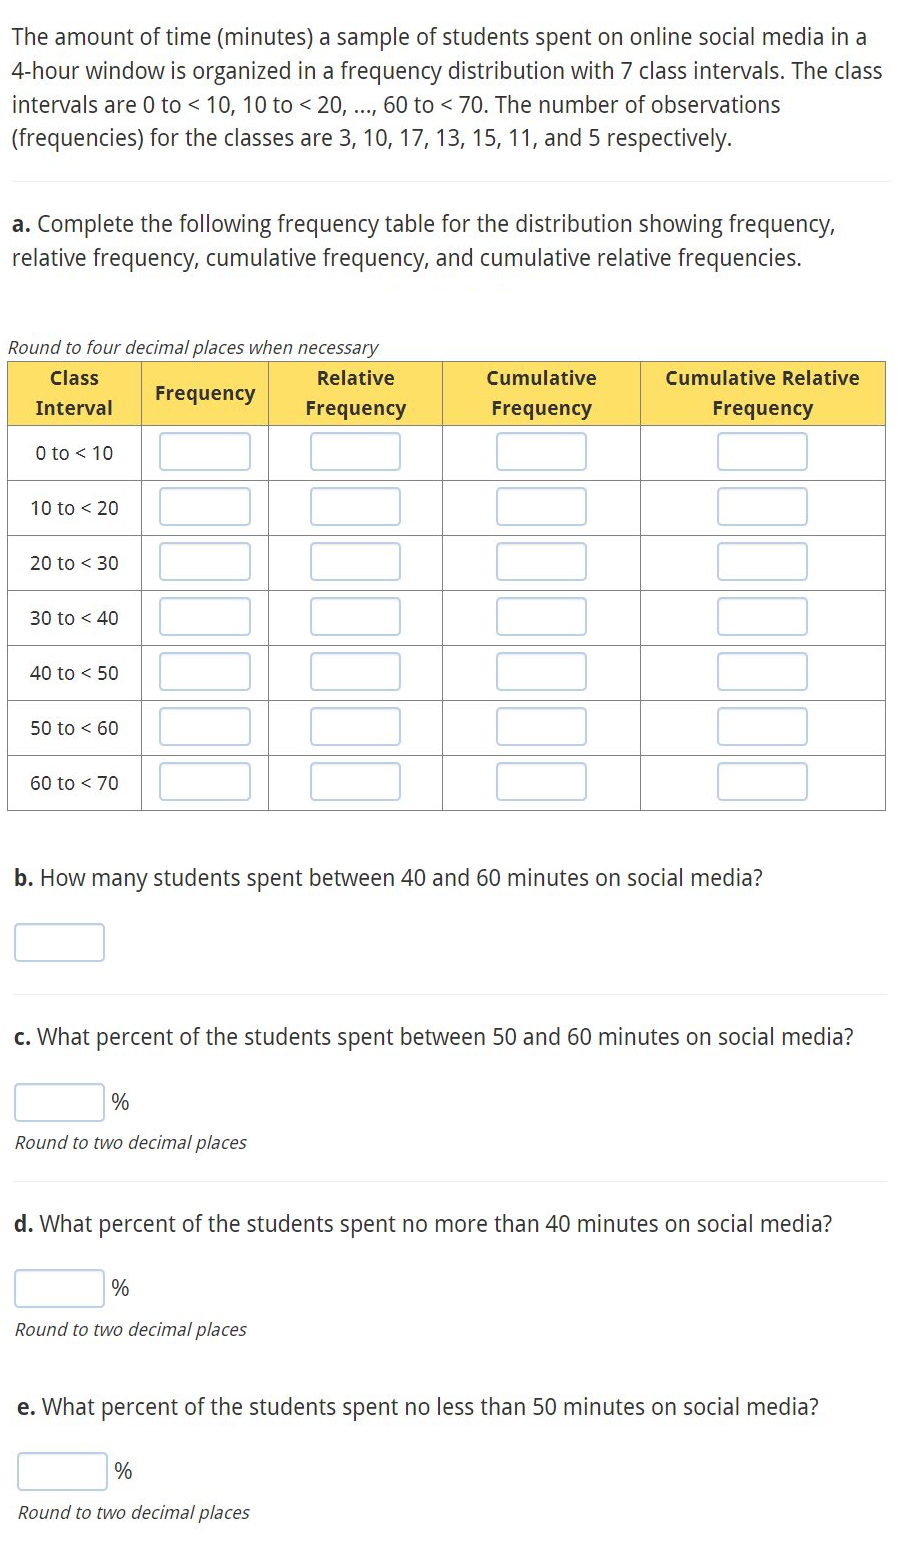 The amount of time (minutes) a sample of students spent on online social media in a
4-hour window is organized in a frequency distribution with 7 class intervals. The class
intervals are 0 to < 10, 10 to 20, ..., 60 to < 70. The number of observations
(frequencies) for the classes are 3, 10, 17, 13, 15, 11, and 5 respectively.
a. Complete the following frequency table for the distribution showing frequency,
relative frequency, cumulative frequency, and cumulative relative frequencies.
Round to four decimal places when necessary
Relative
Class
Interval
Frequency
Frequency
0 to < 10
10 to < 20
20 to < 30
30 to < 40
40 to 50
50 to 60
60 to < 70
%
Round to two decimal places
Cumulative
Frequency
b. How many students spent between 40 and 60 minutes on social media?
Cumulative Relative
c. What percent of the students spent between 50 and 60 minutes on social media?
%
Round to two decimal places
Frequency
d. What percent of the students spent no more than 40 minutes on social media?
%
Round to two decimal places
e. What percent of the students spent no less than 50 minutes on social media?